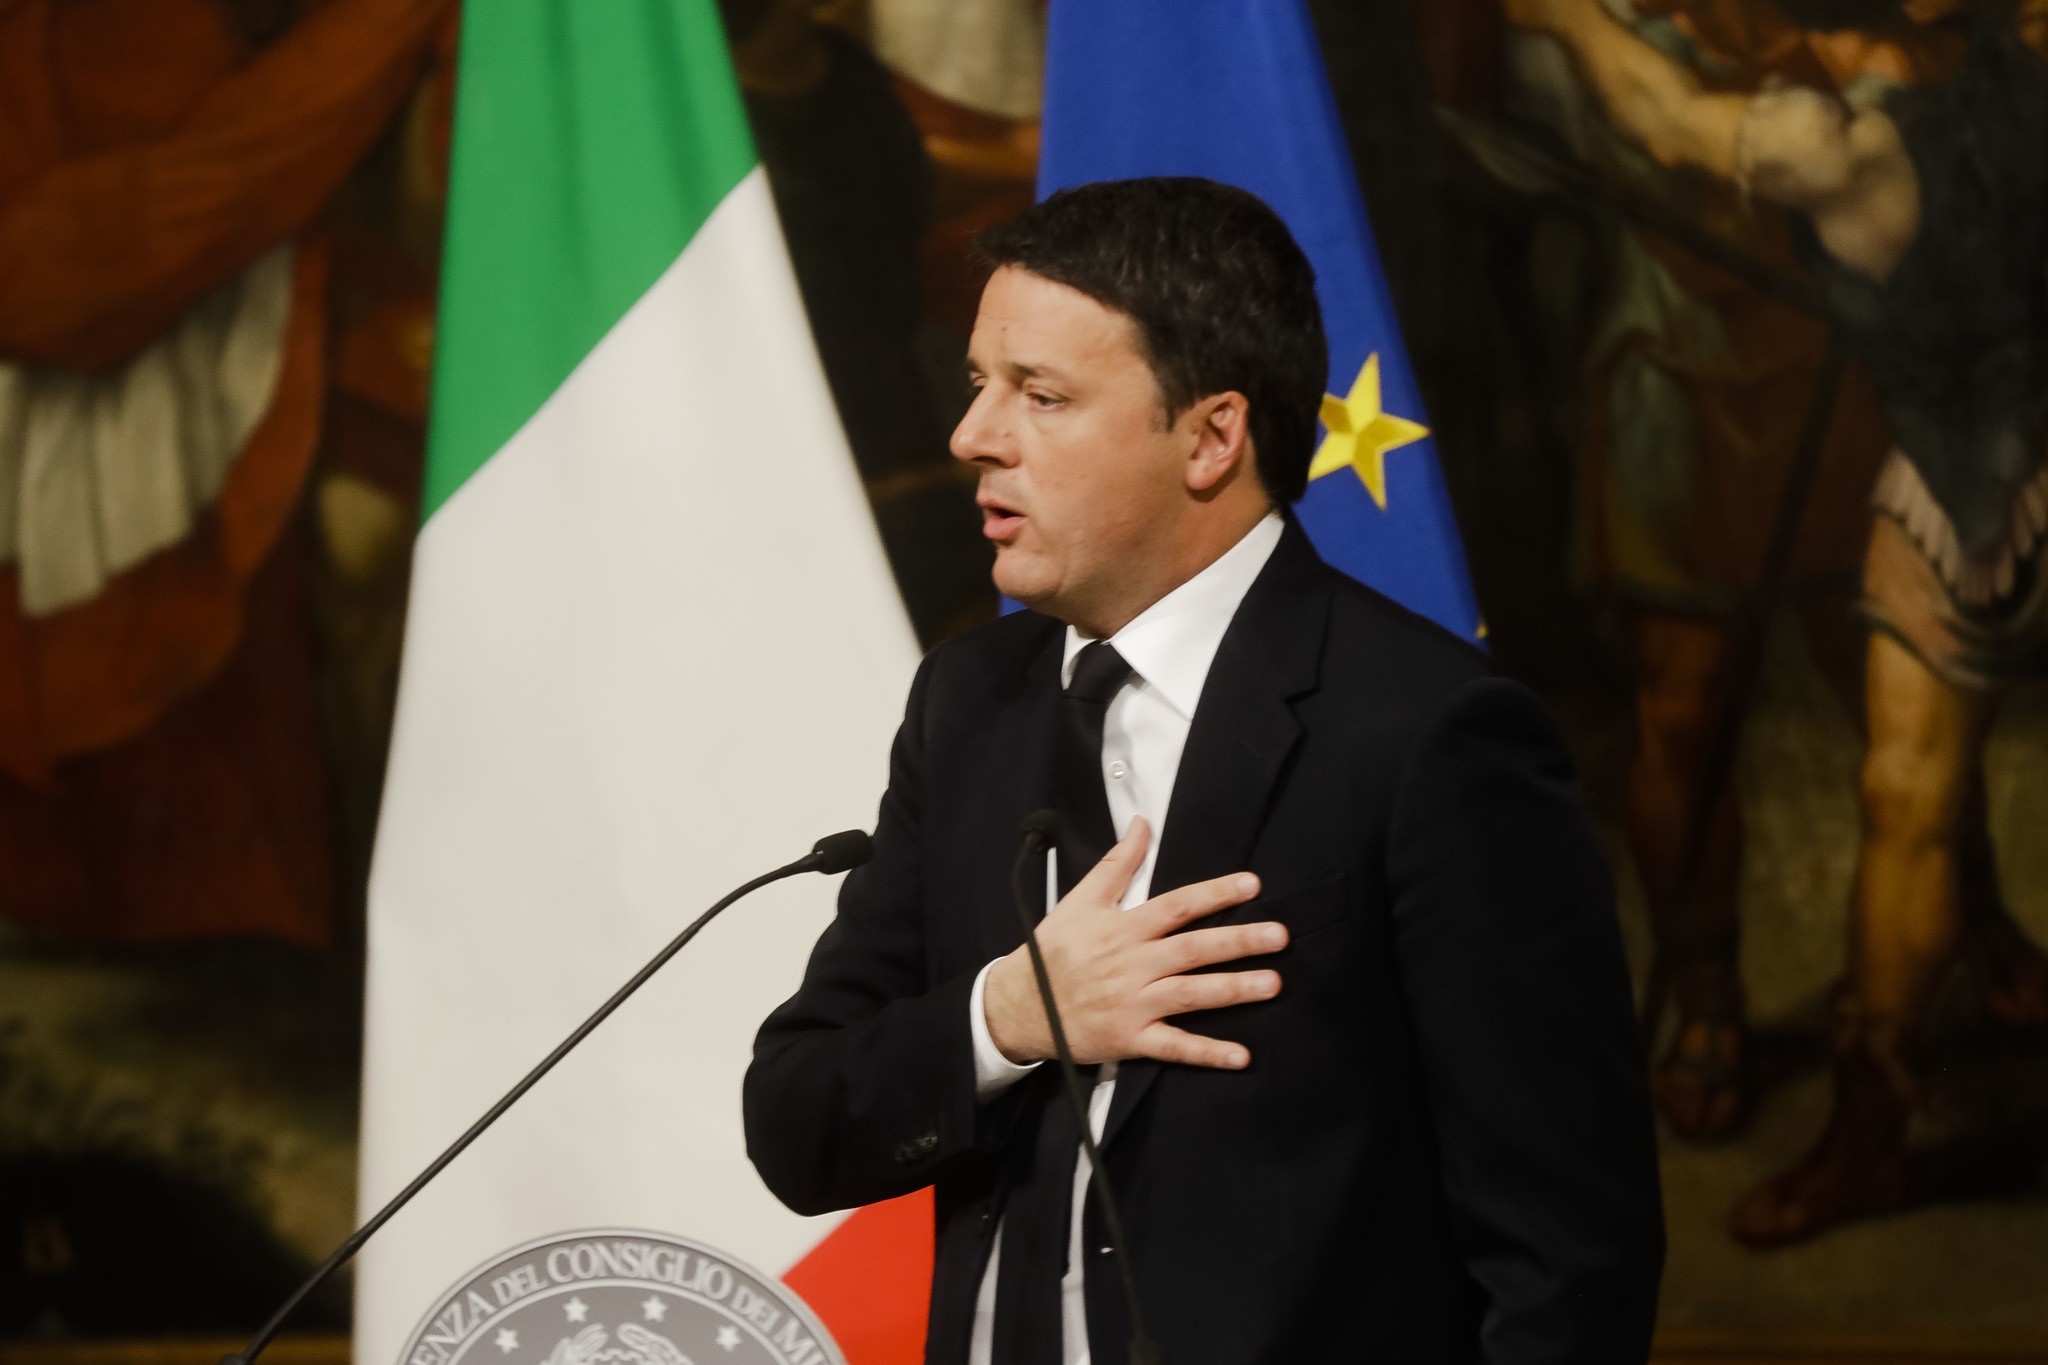 Italian Premier Matteo Renzi speaks during a press conference at the premier's office Chigi Palace, in Rome, early Monday, Dec. 5, 2016. (AP Photo)